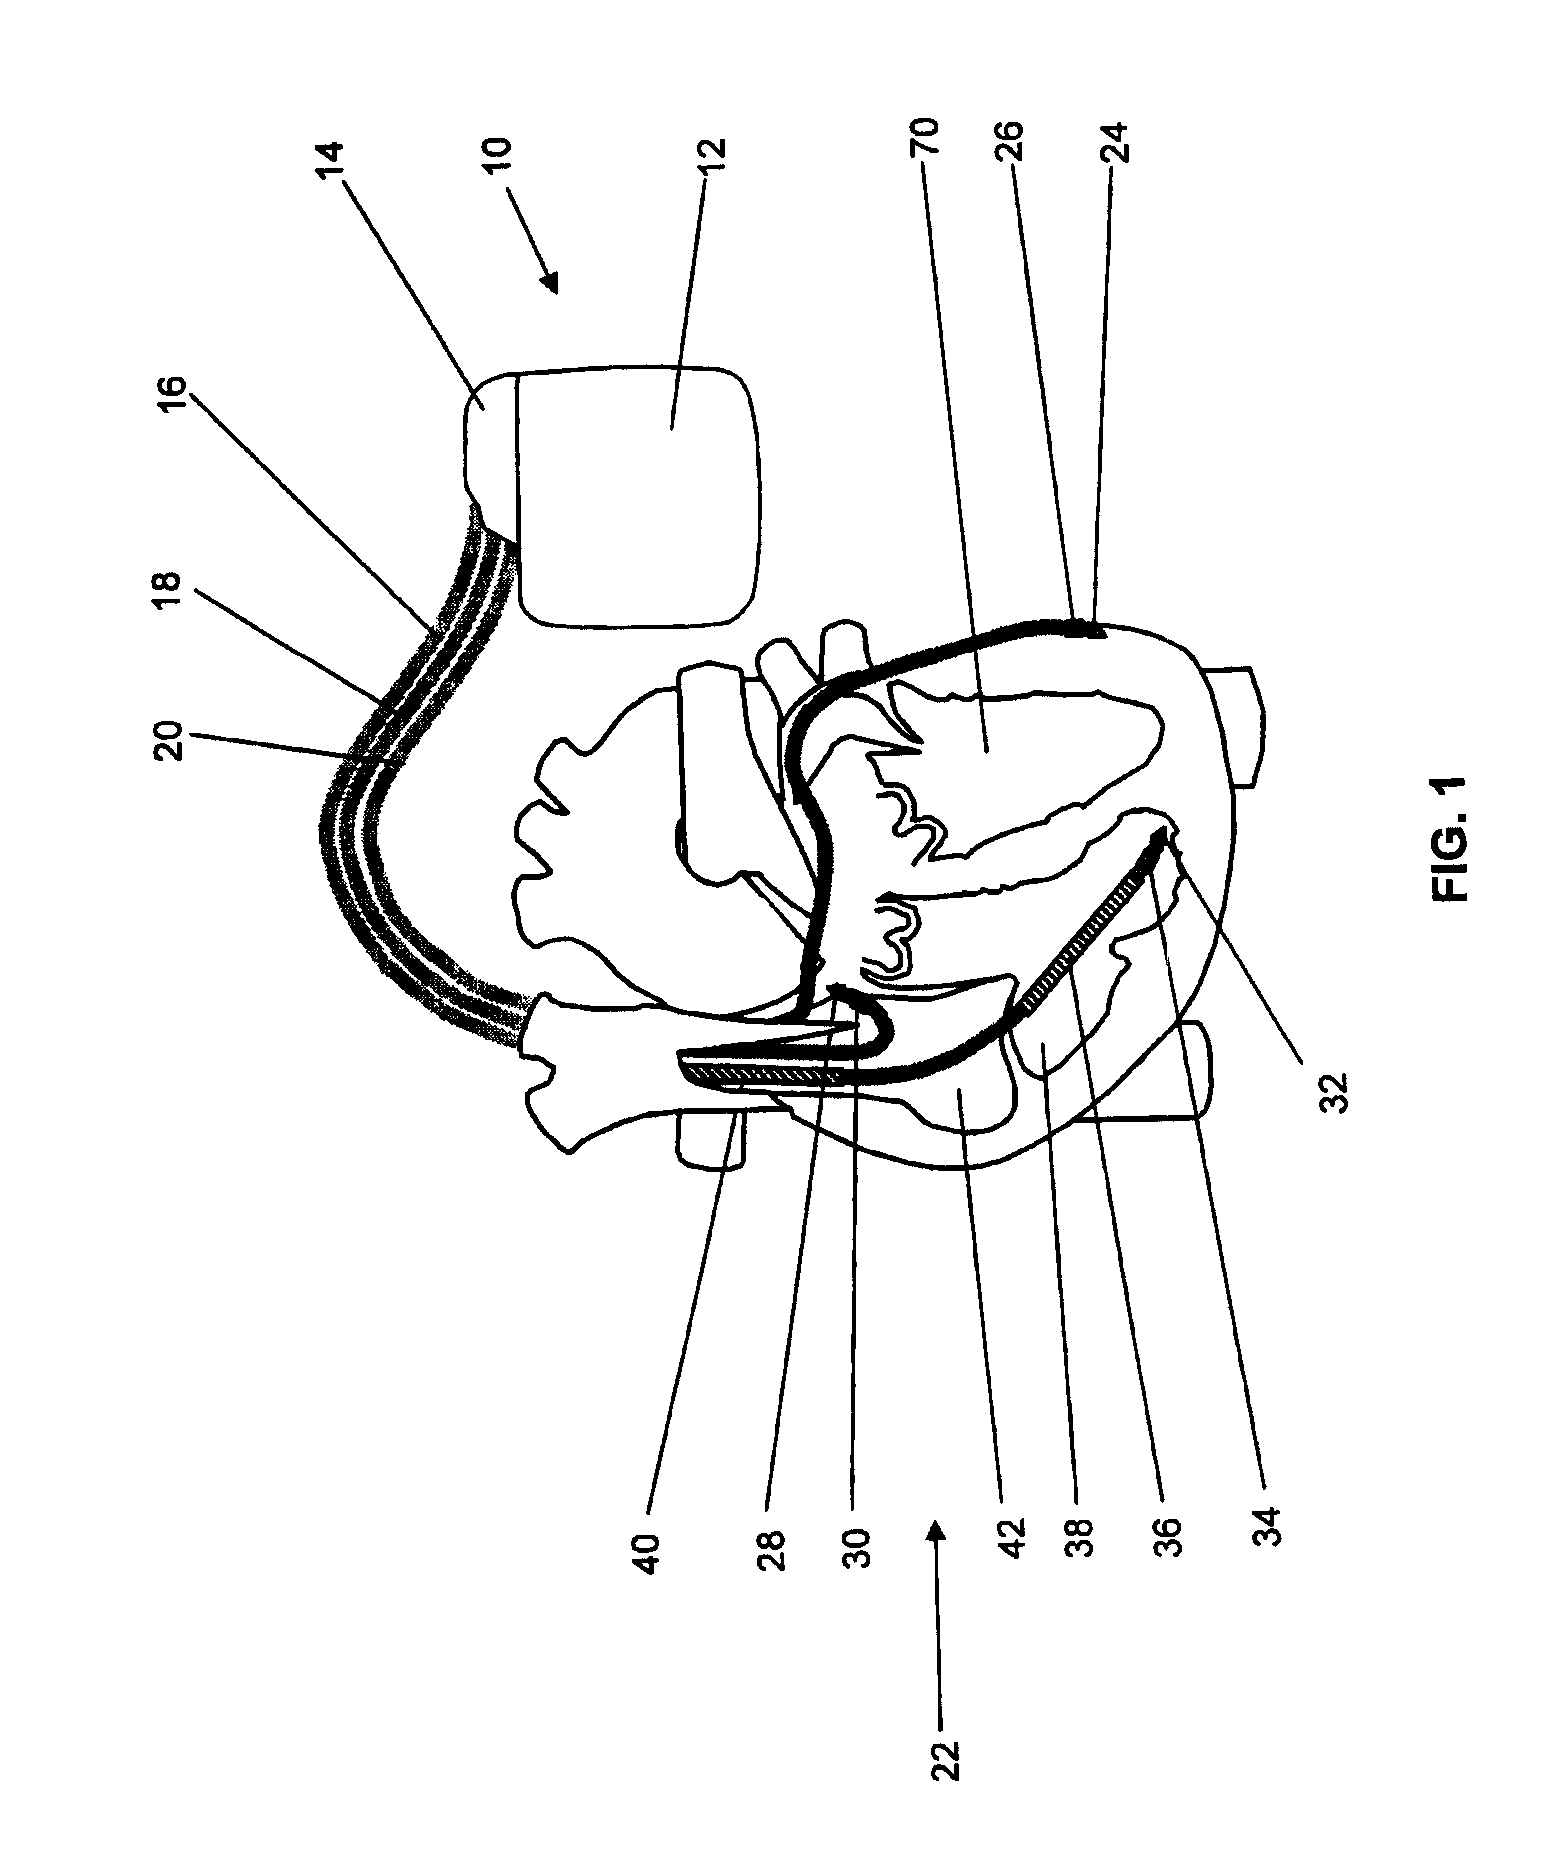 Implantable medical device and method for lv coronary sinus lead implant site optimization